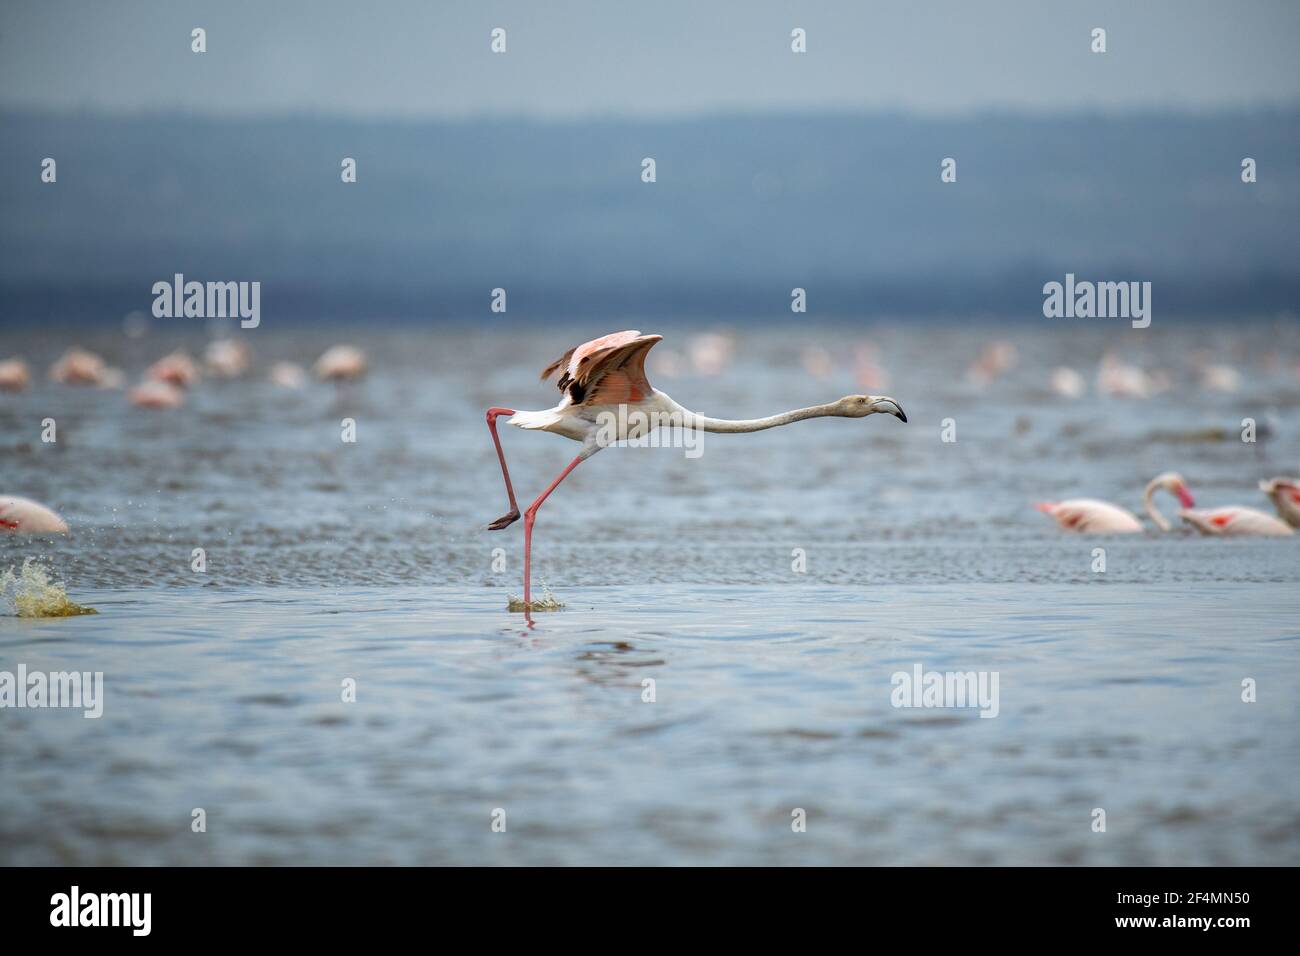 Greater Flamingo (Phoenicopterus roseus) with open wings running on water at lake nakuru, Kenya with thousands of Lesser flamingo in background Stock Photo